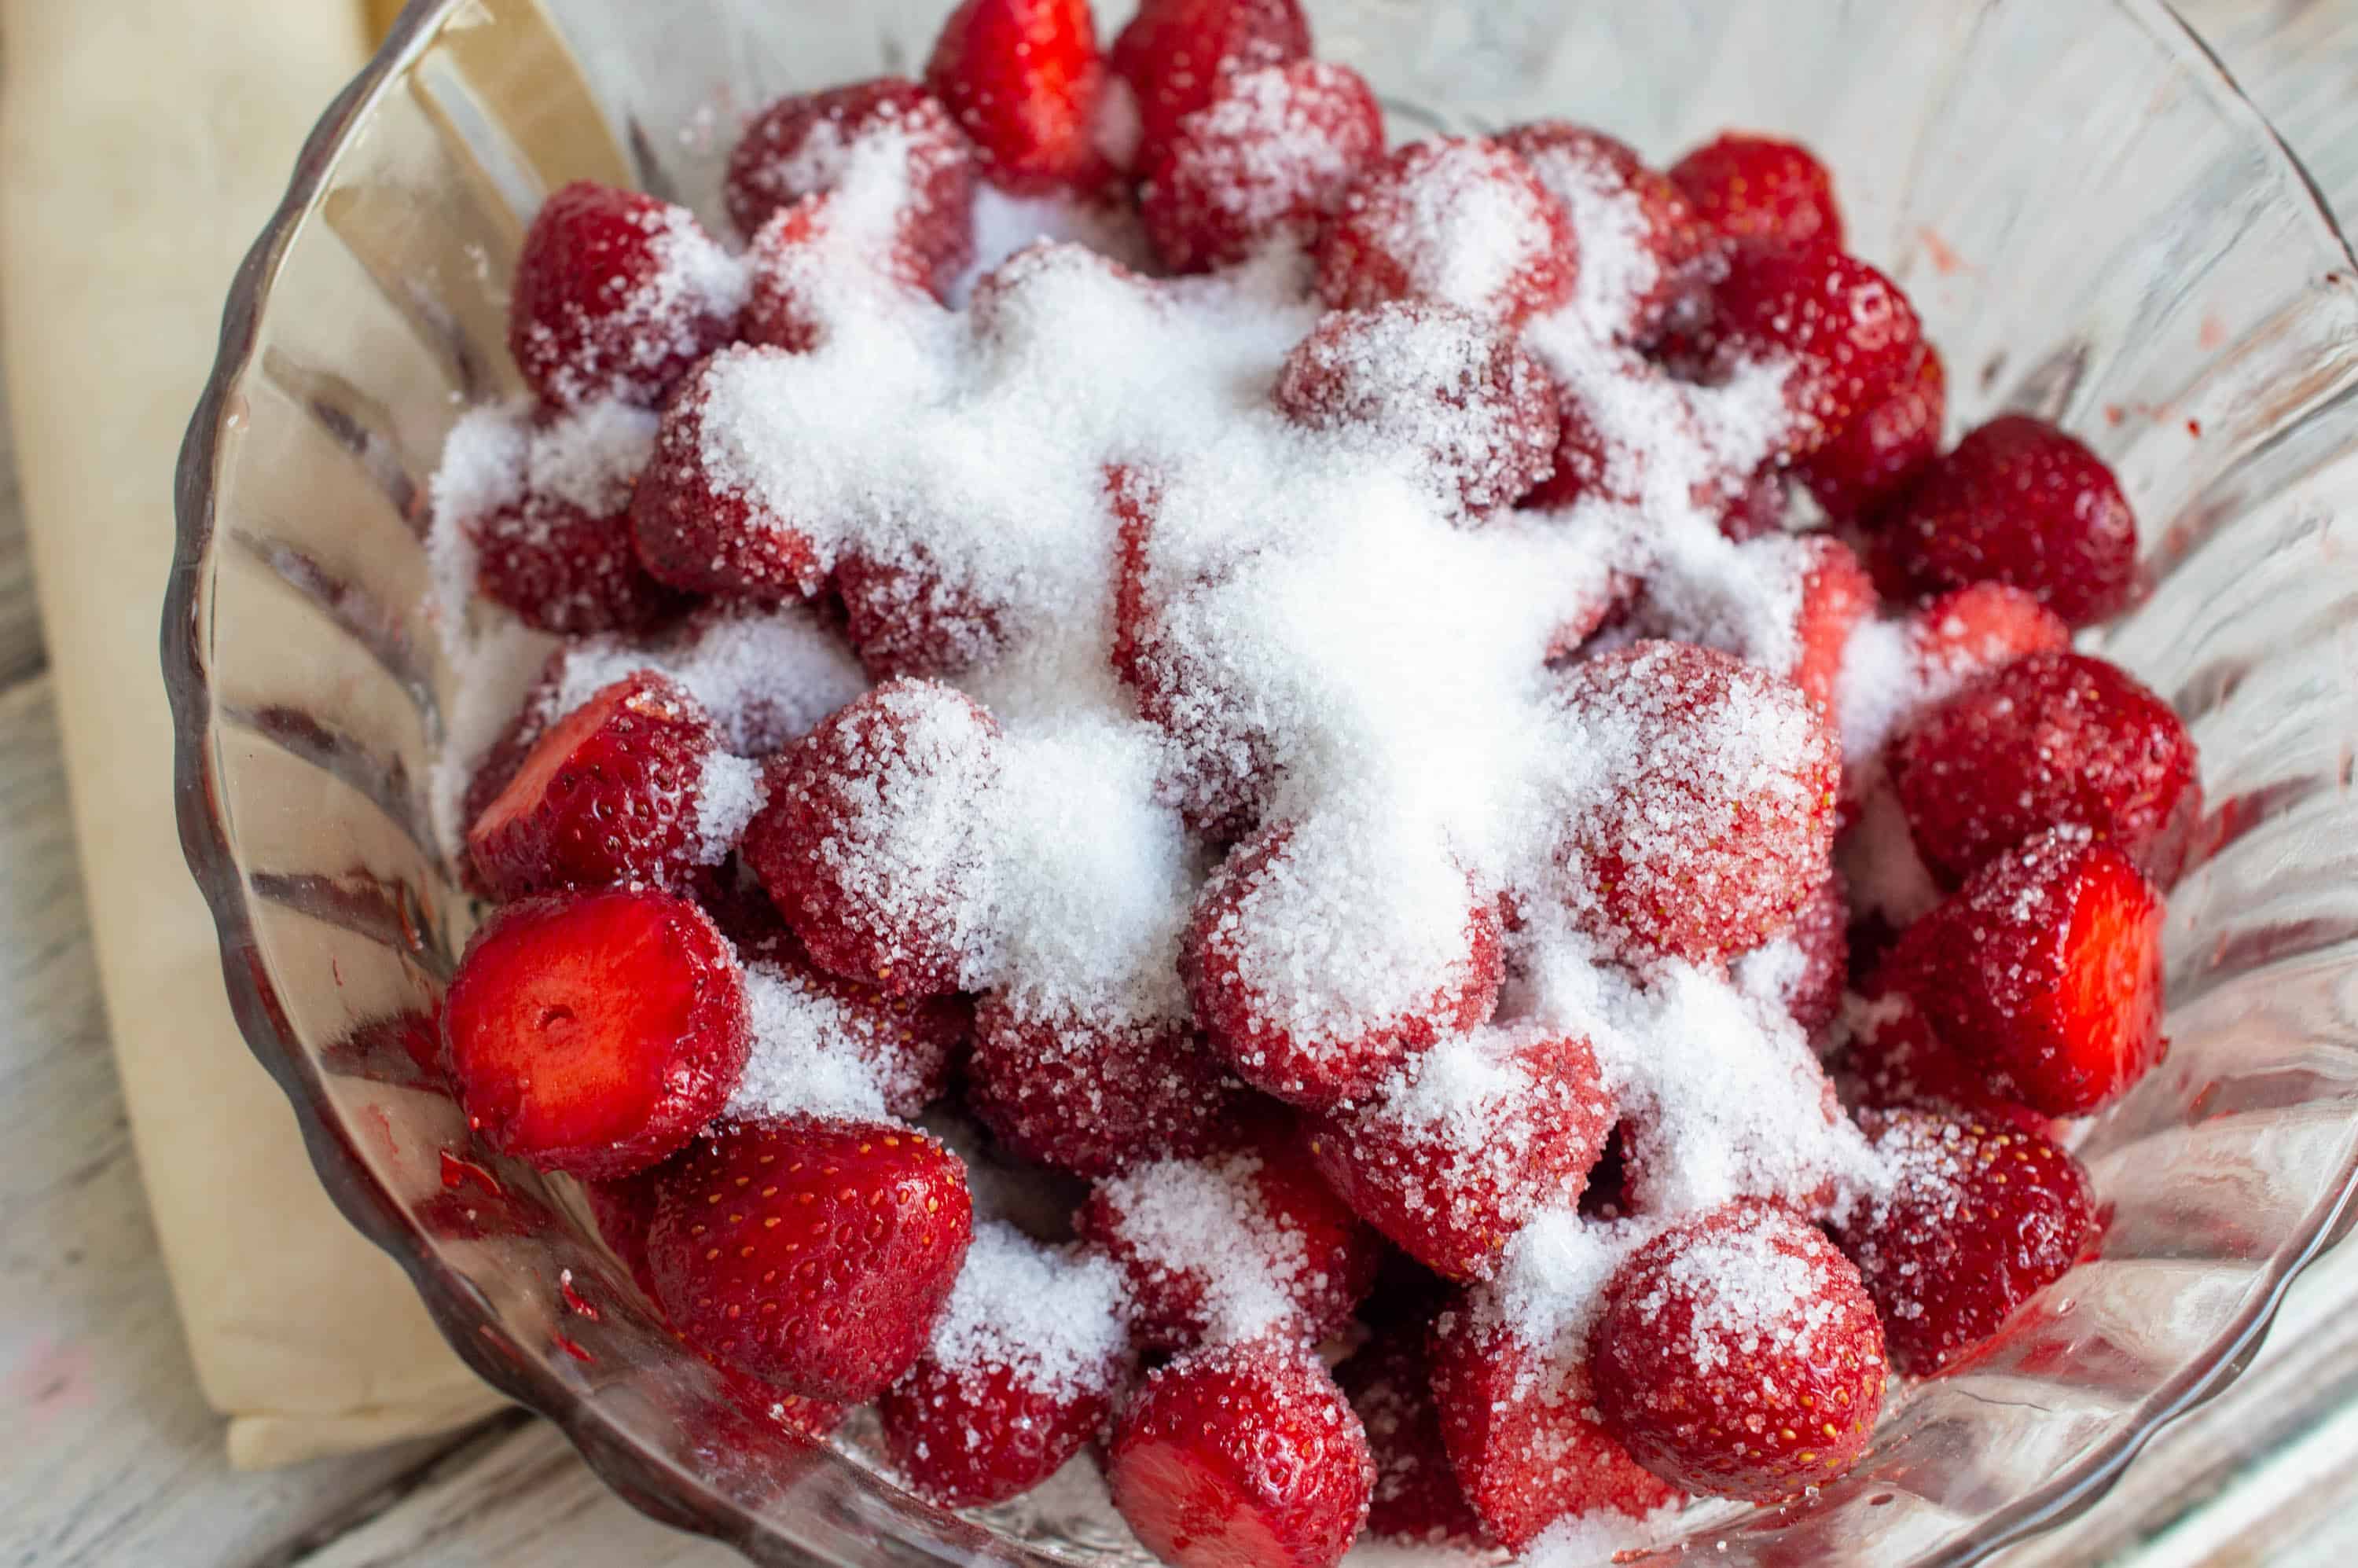 sugar and strawberries in a bowl